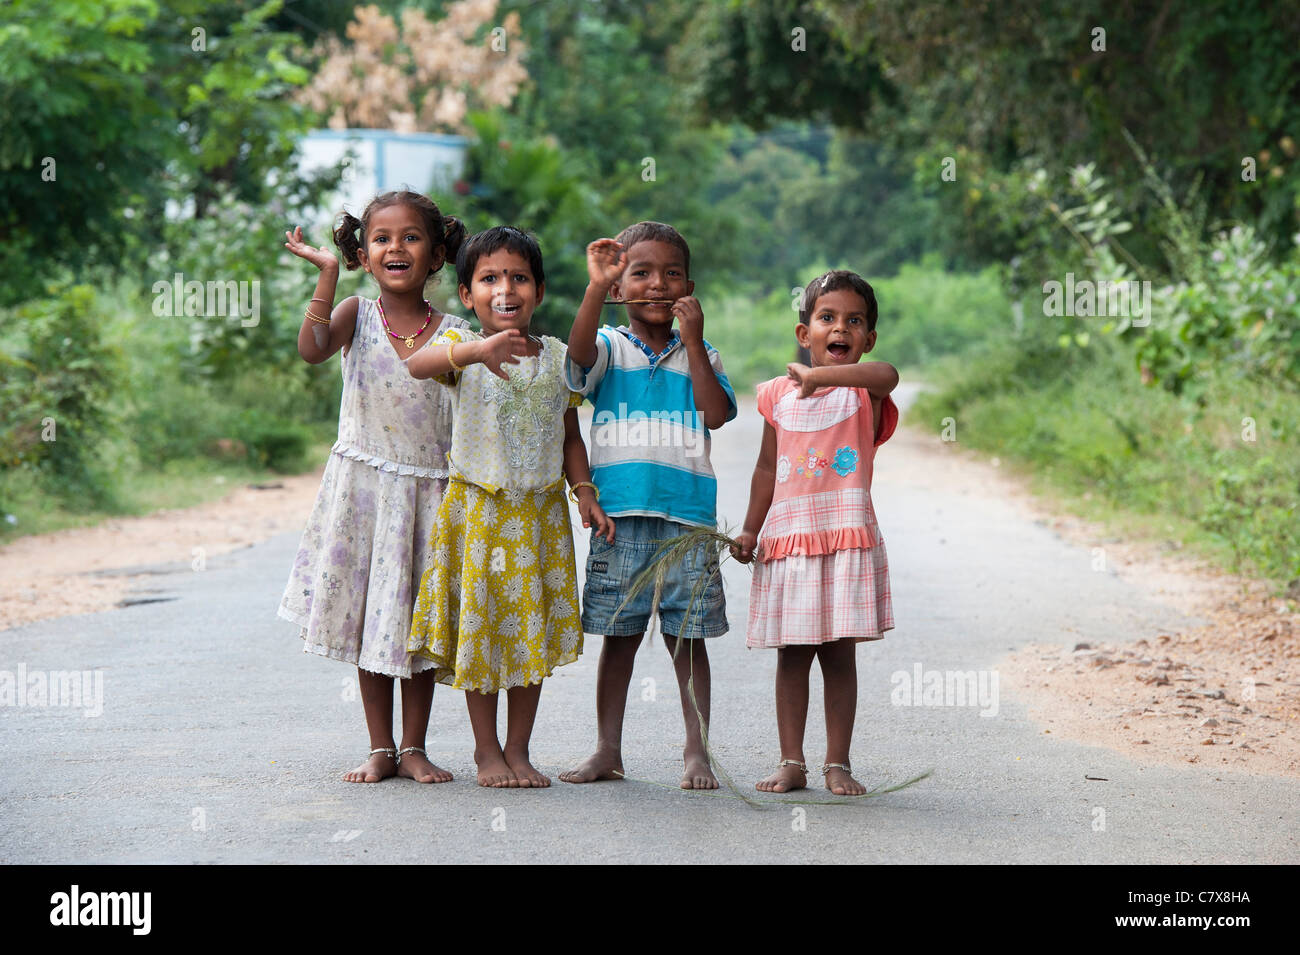 Happy young rural Indian village children standing on a road laughing waving and smiling. Andhra Pradesh, India Stock Photo